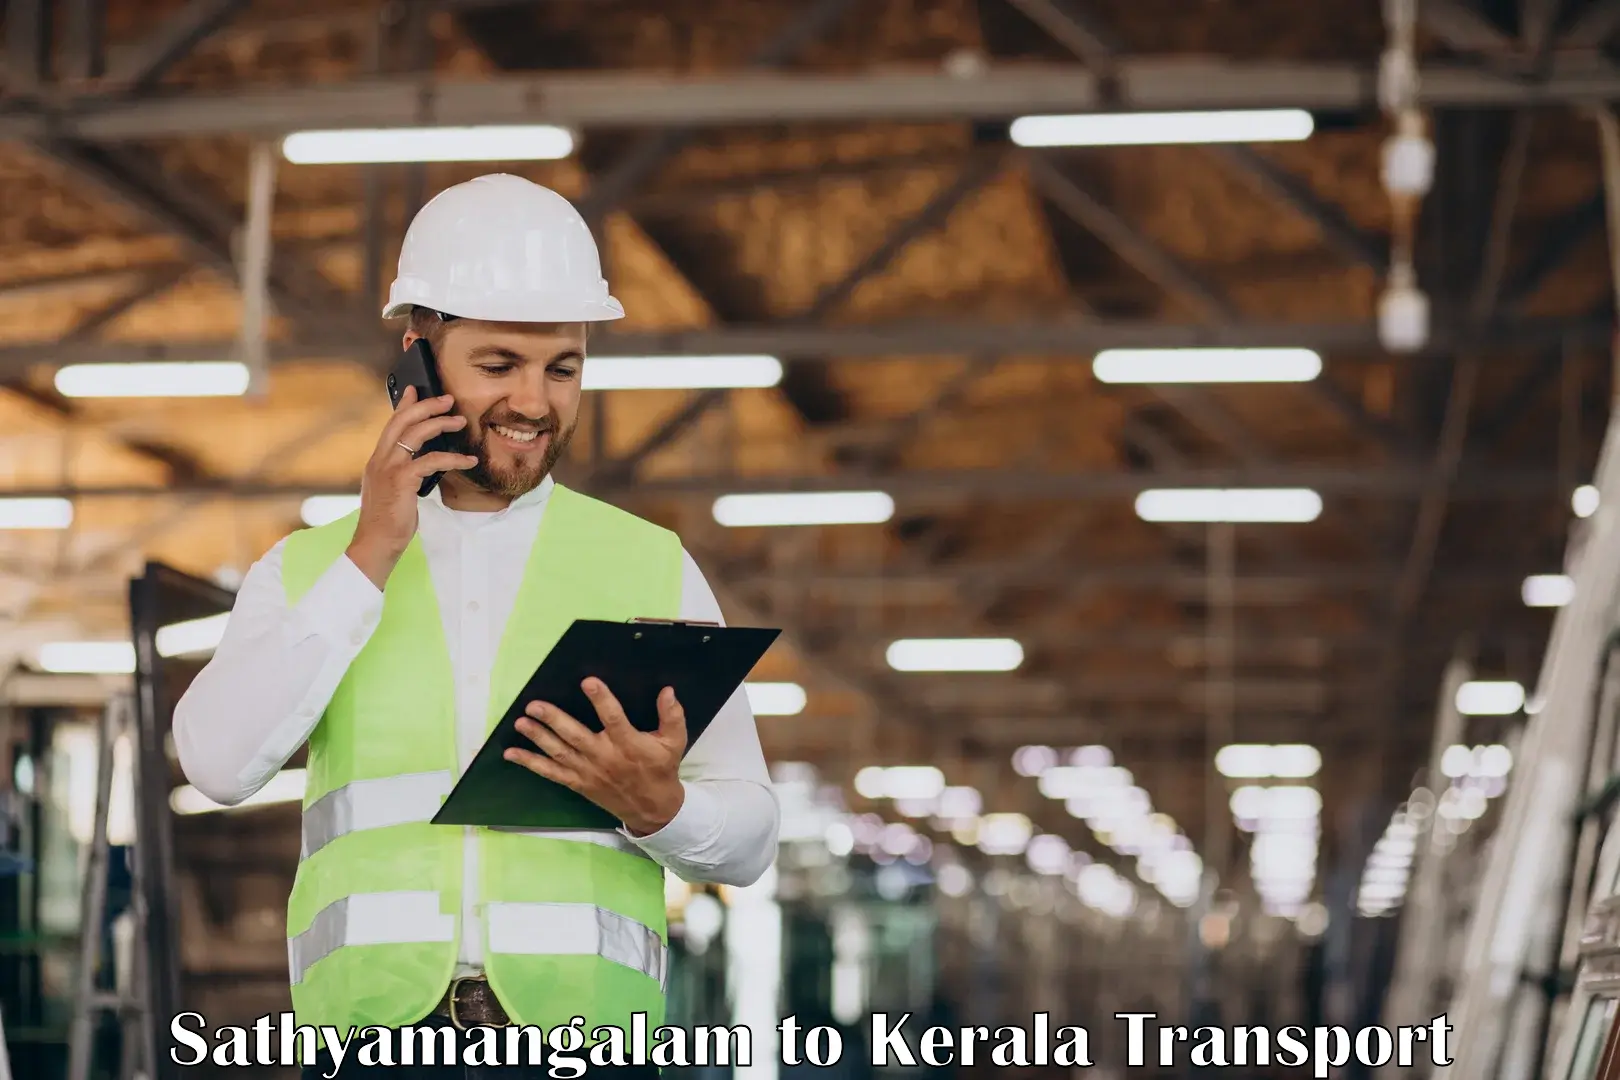 Cargo train transport services in Sathyamangalam to Kerala